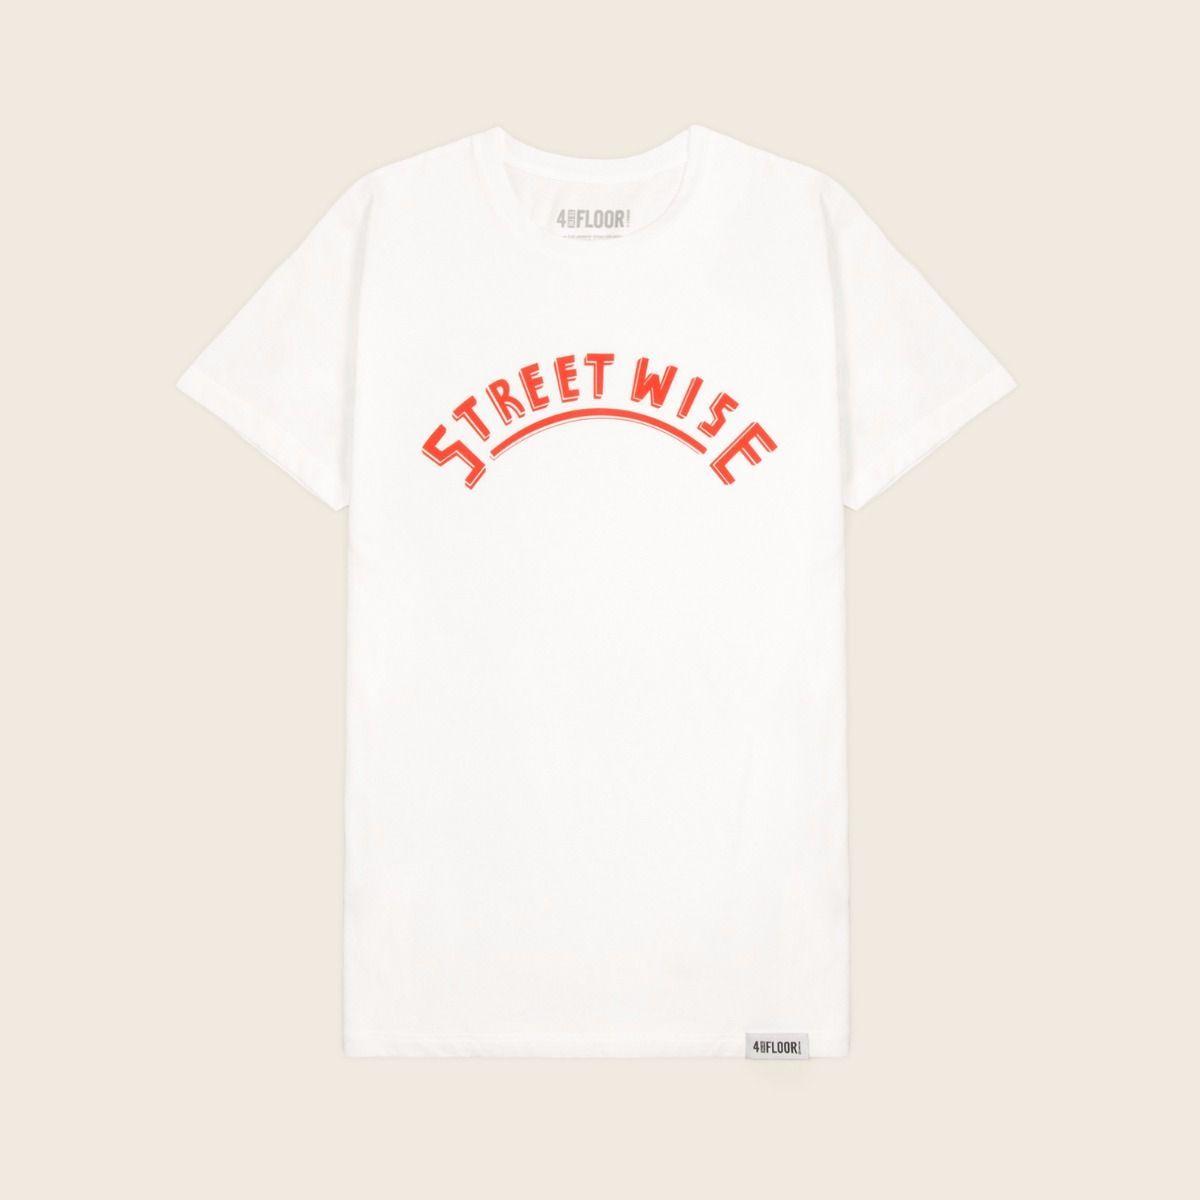 Streetwise Logo - 4 To The Floor - Streetwise Records Mens White T-shirt